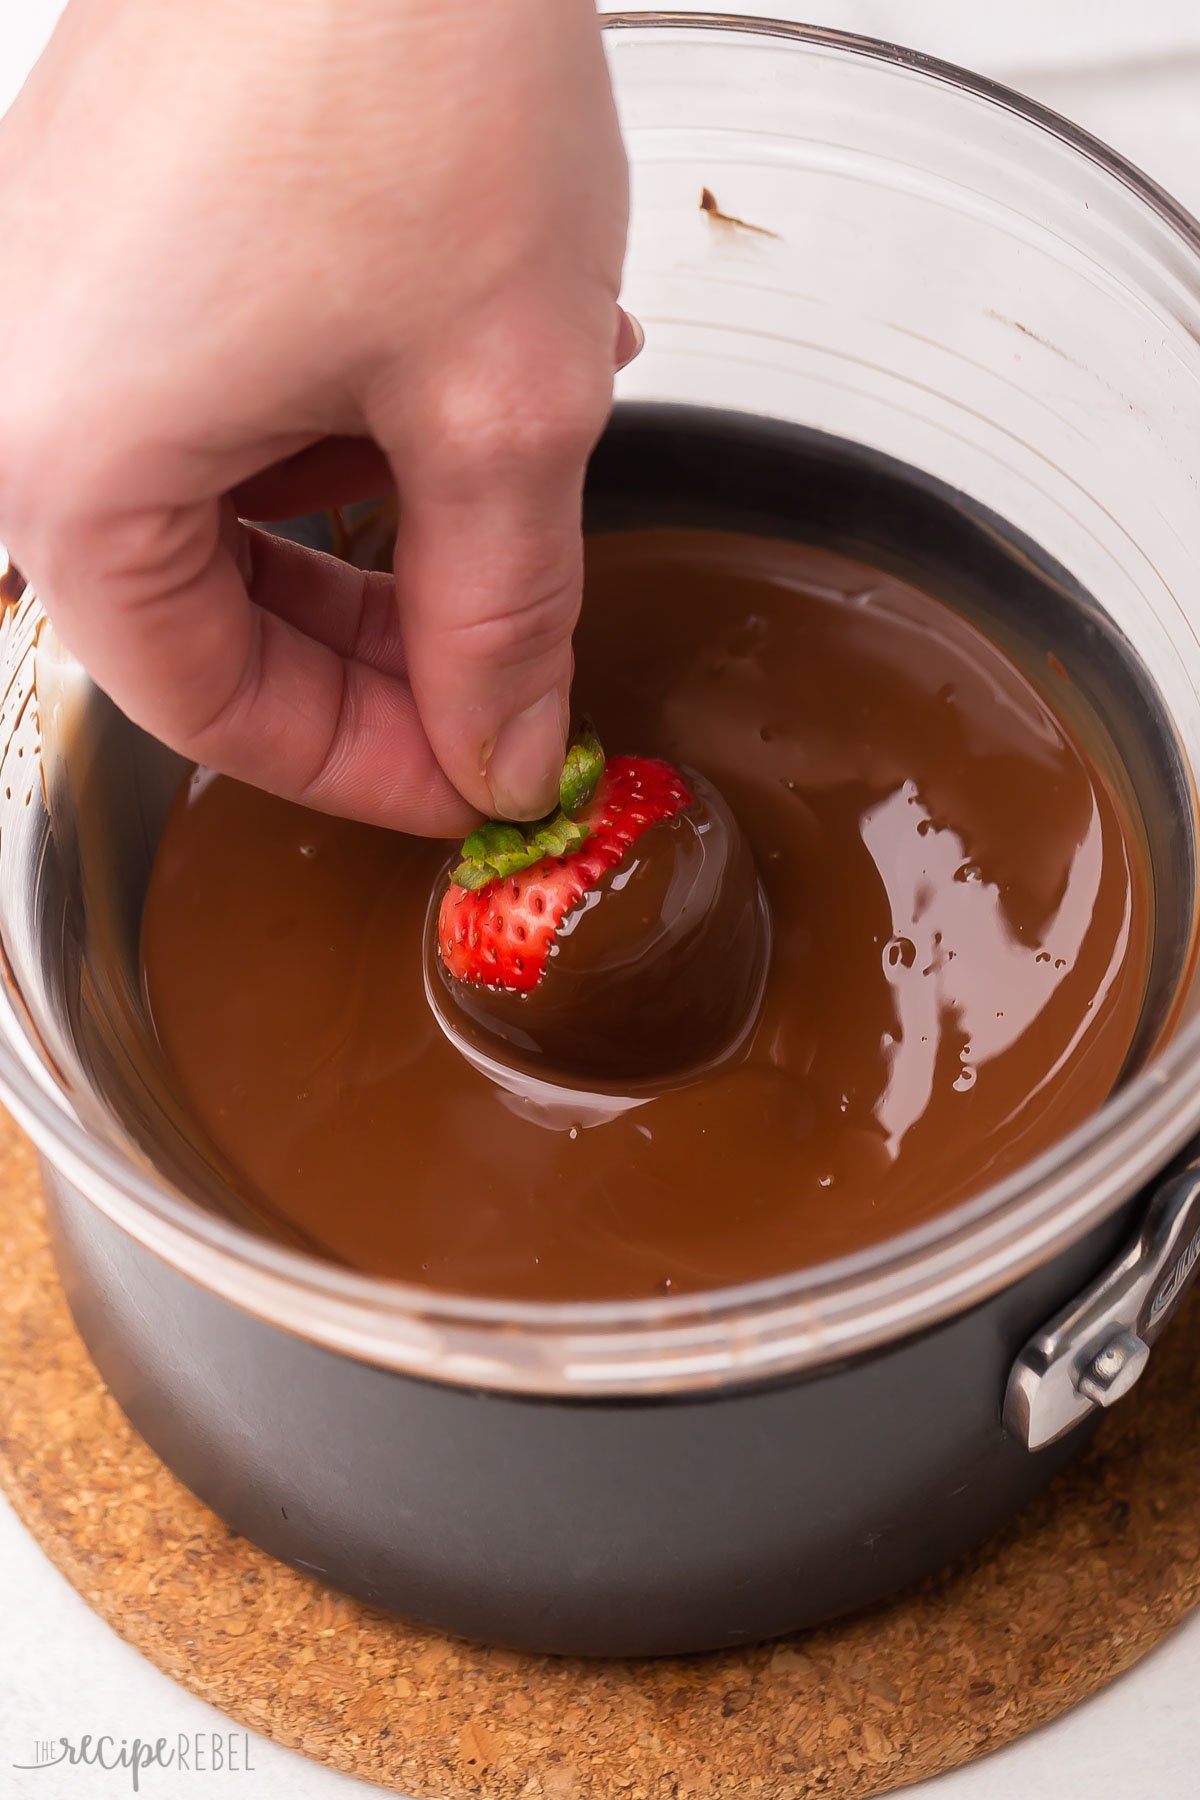 Dipping a strawberry into a bowl of melted chocolate.